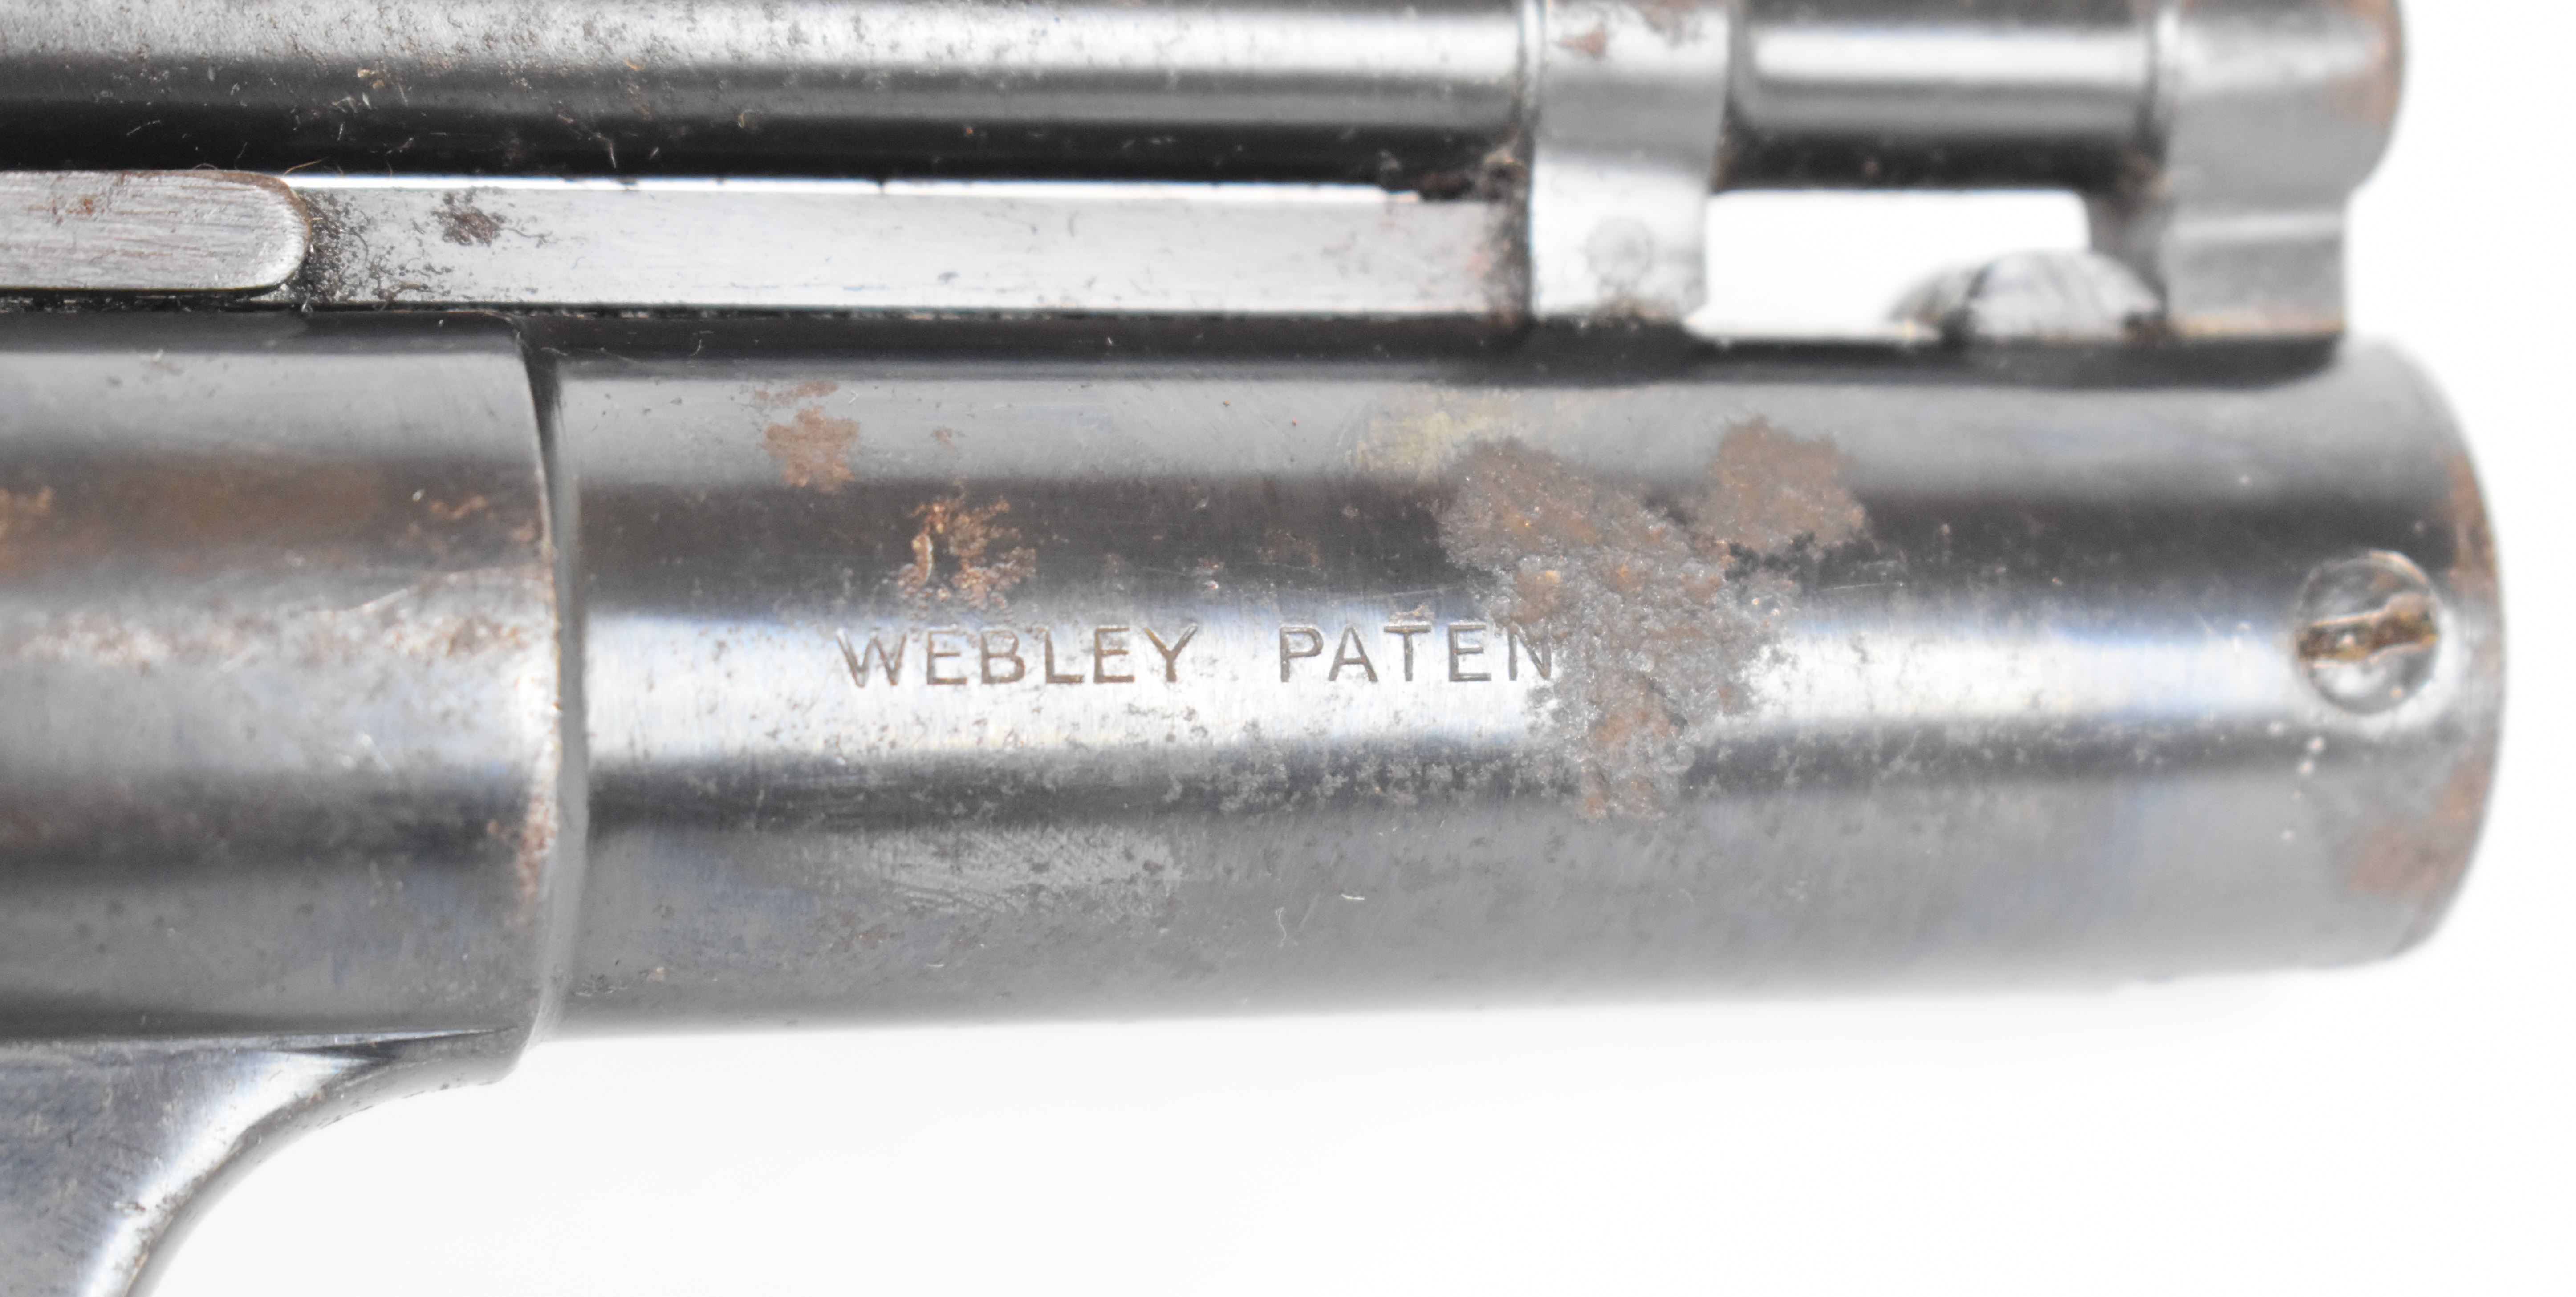 Webley Senior .177 air pistol with named and chequered Bakelite grips and adjustable sights, - Image 10 of 12